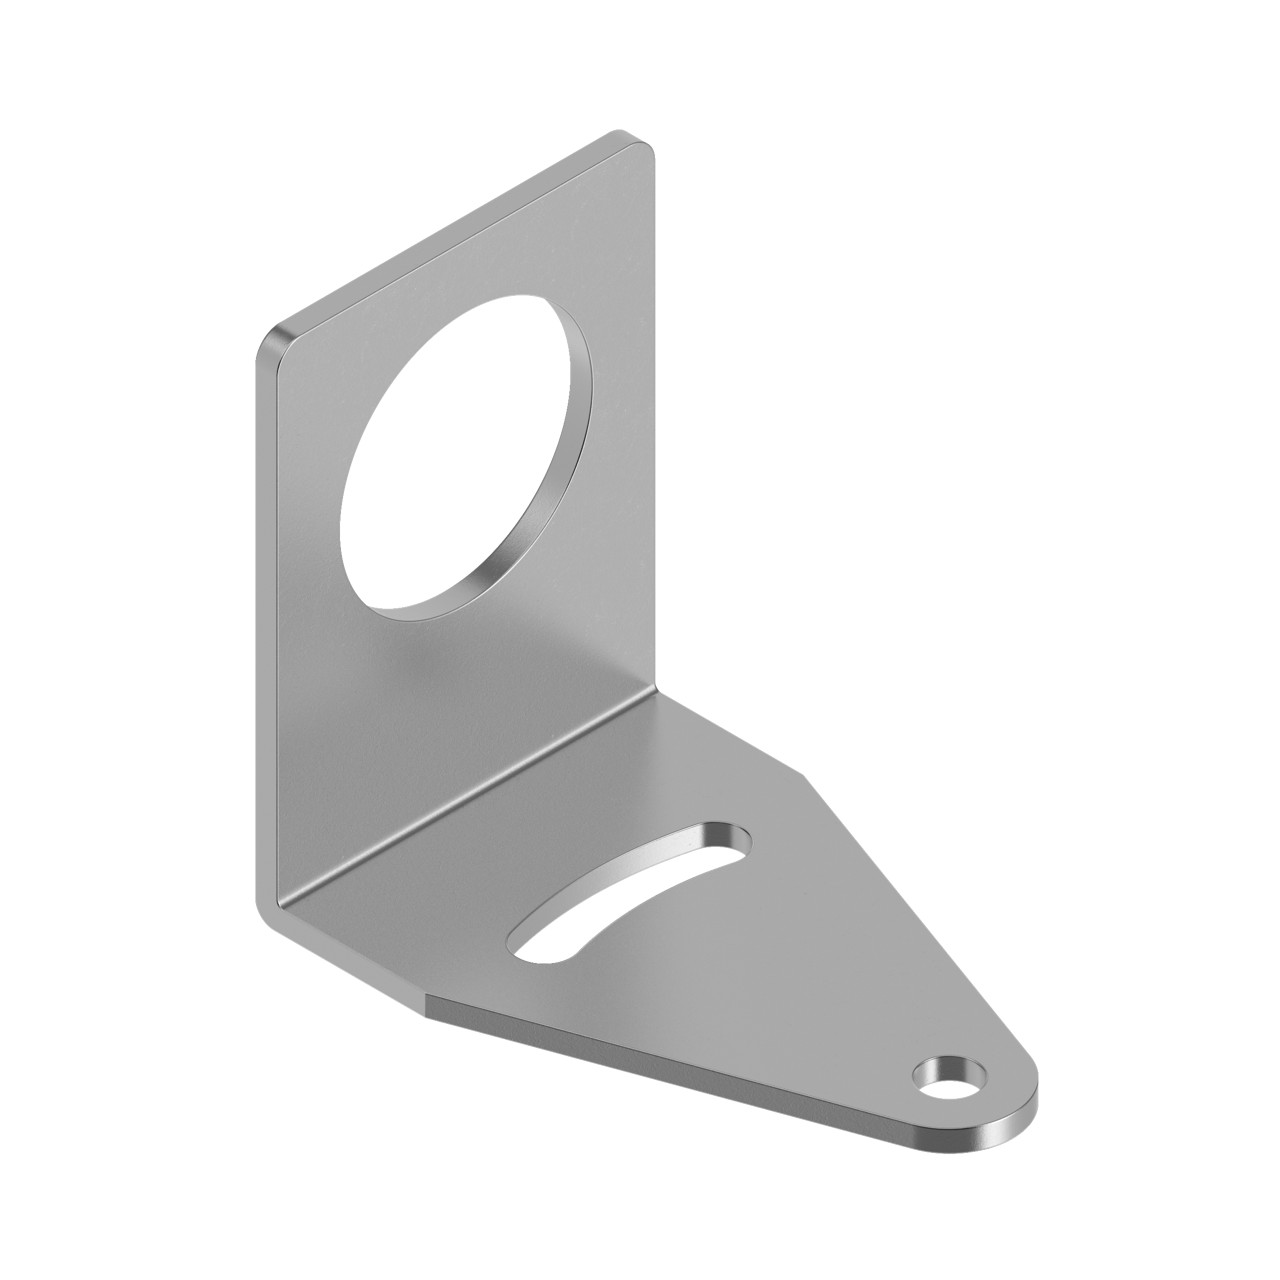 SMB30A - Bracket: Right-Angle Mounting; Material: 12 Gauge Stainless Steel; Curved mounting slot for versatility/orientation; Clearance for M6 (1/4 in